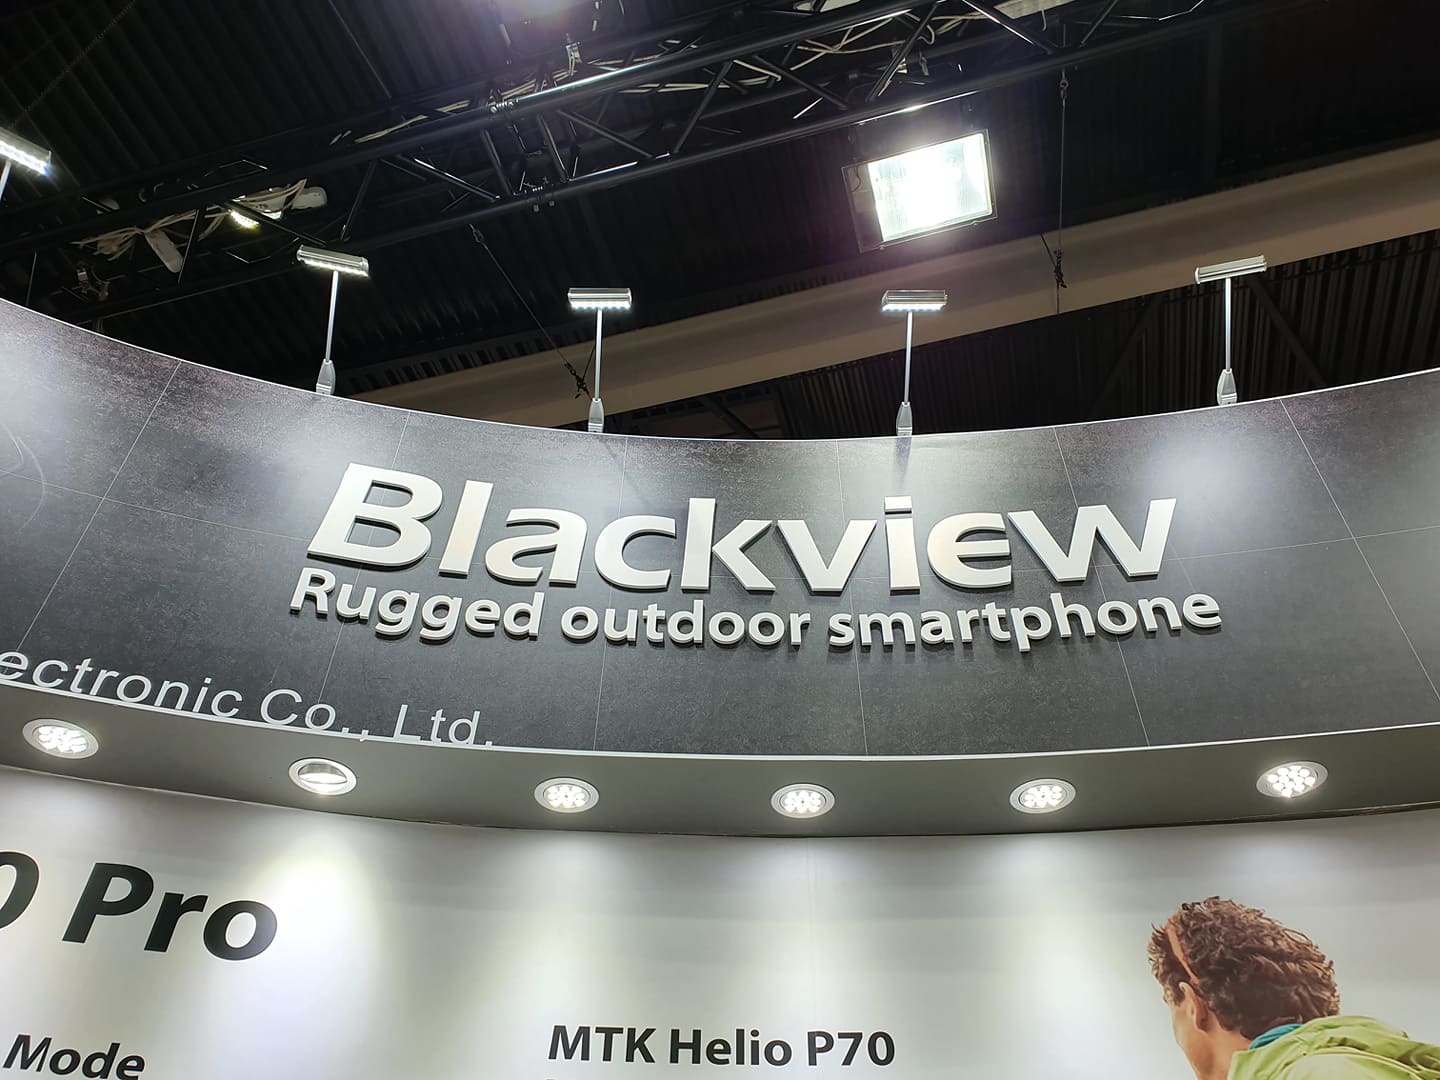 Blackview Showcases new BV9800 Rugged phone and Max 1 Projector smartphone at MWC 2019